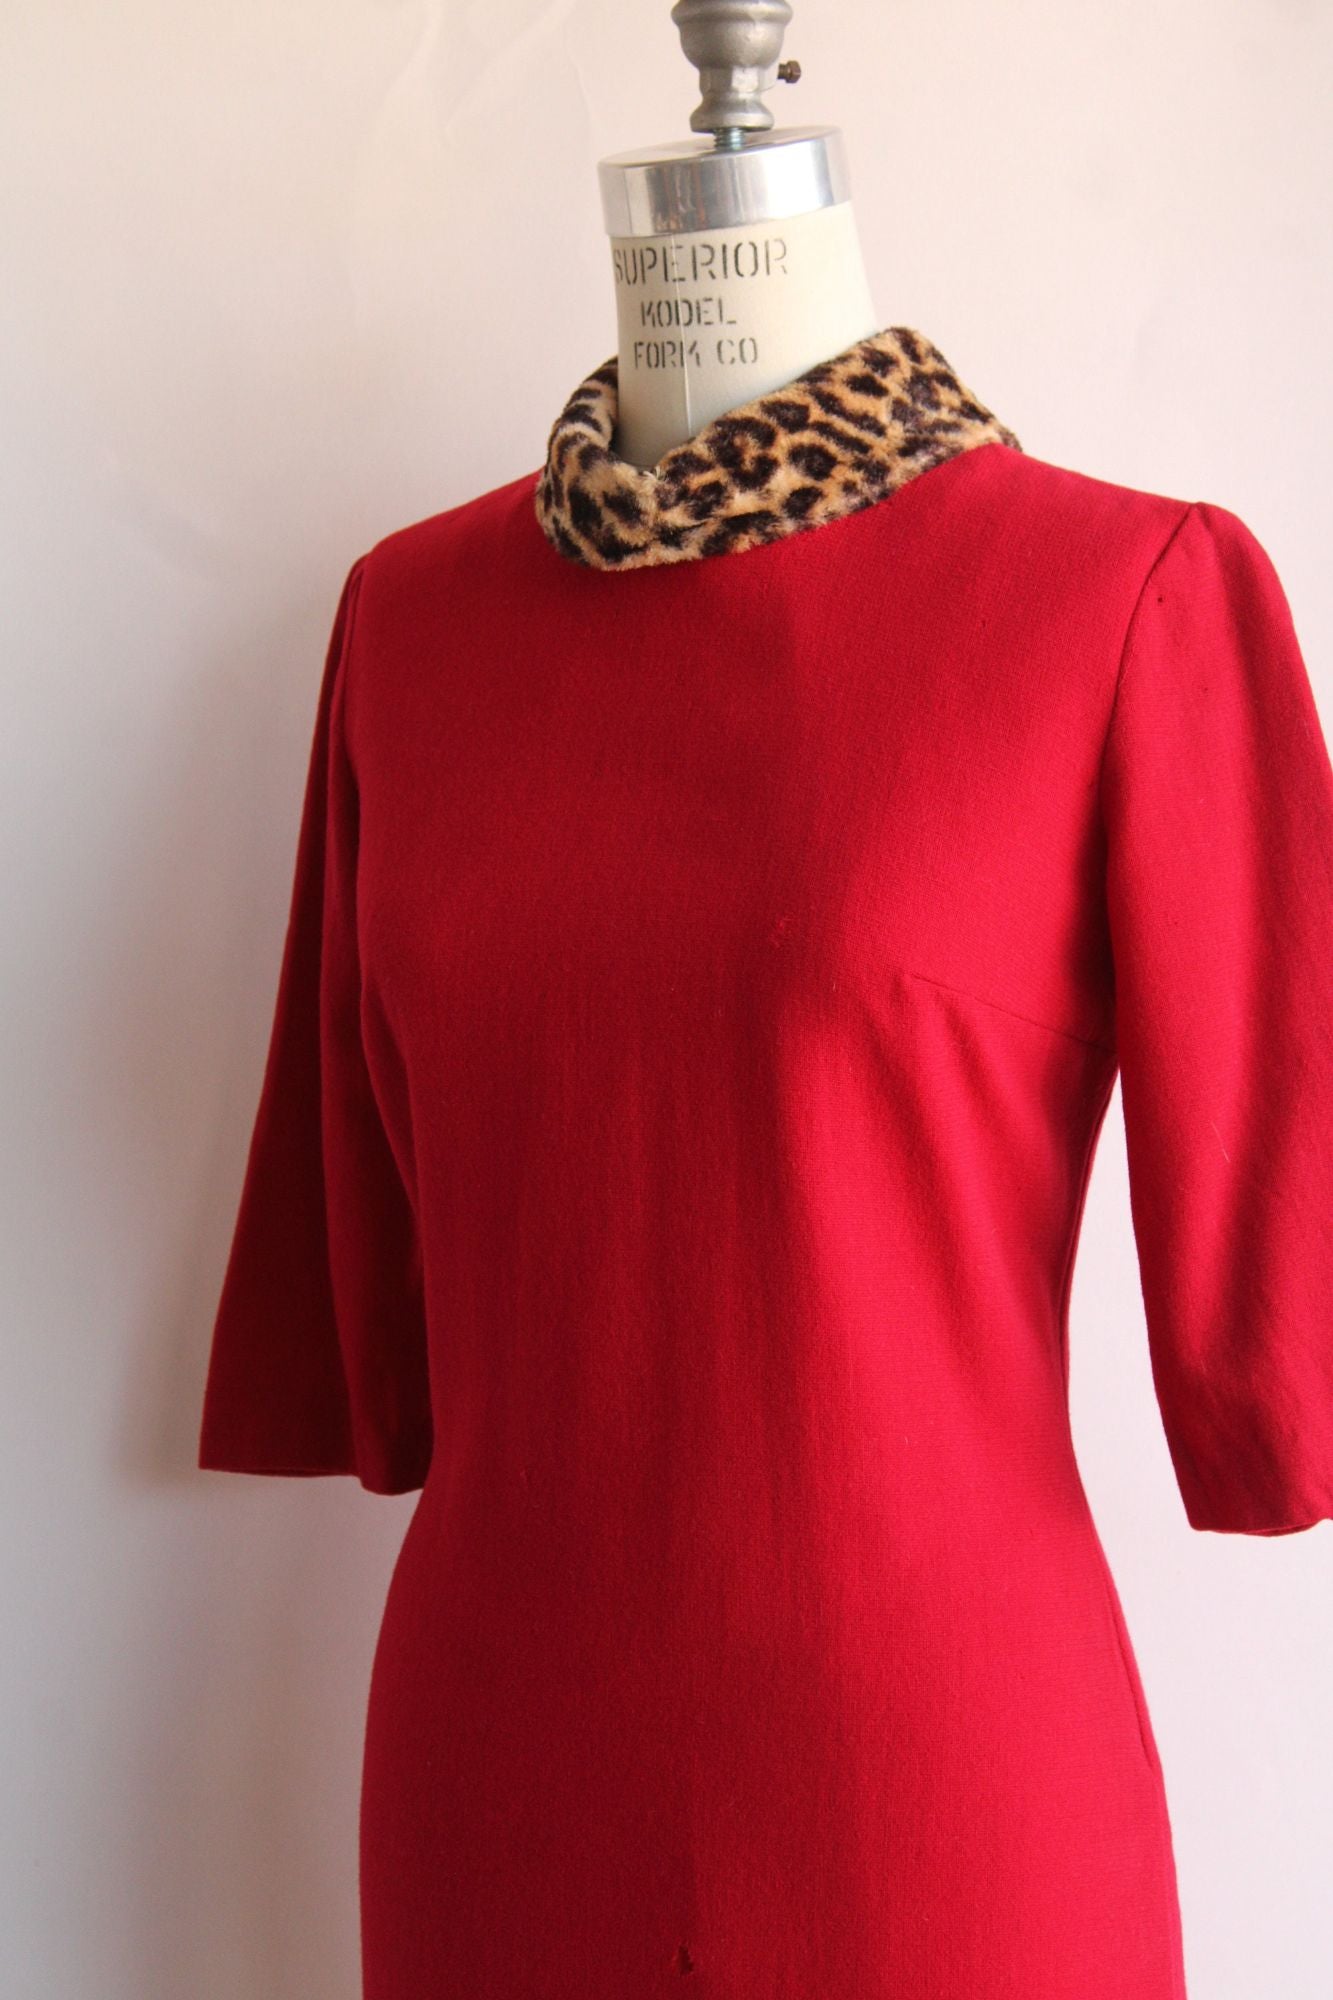 Vintage 1960s Dress in Red Wool with Leopard Print Collar